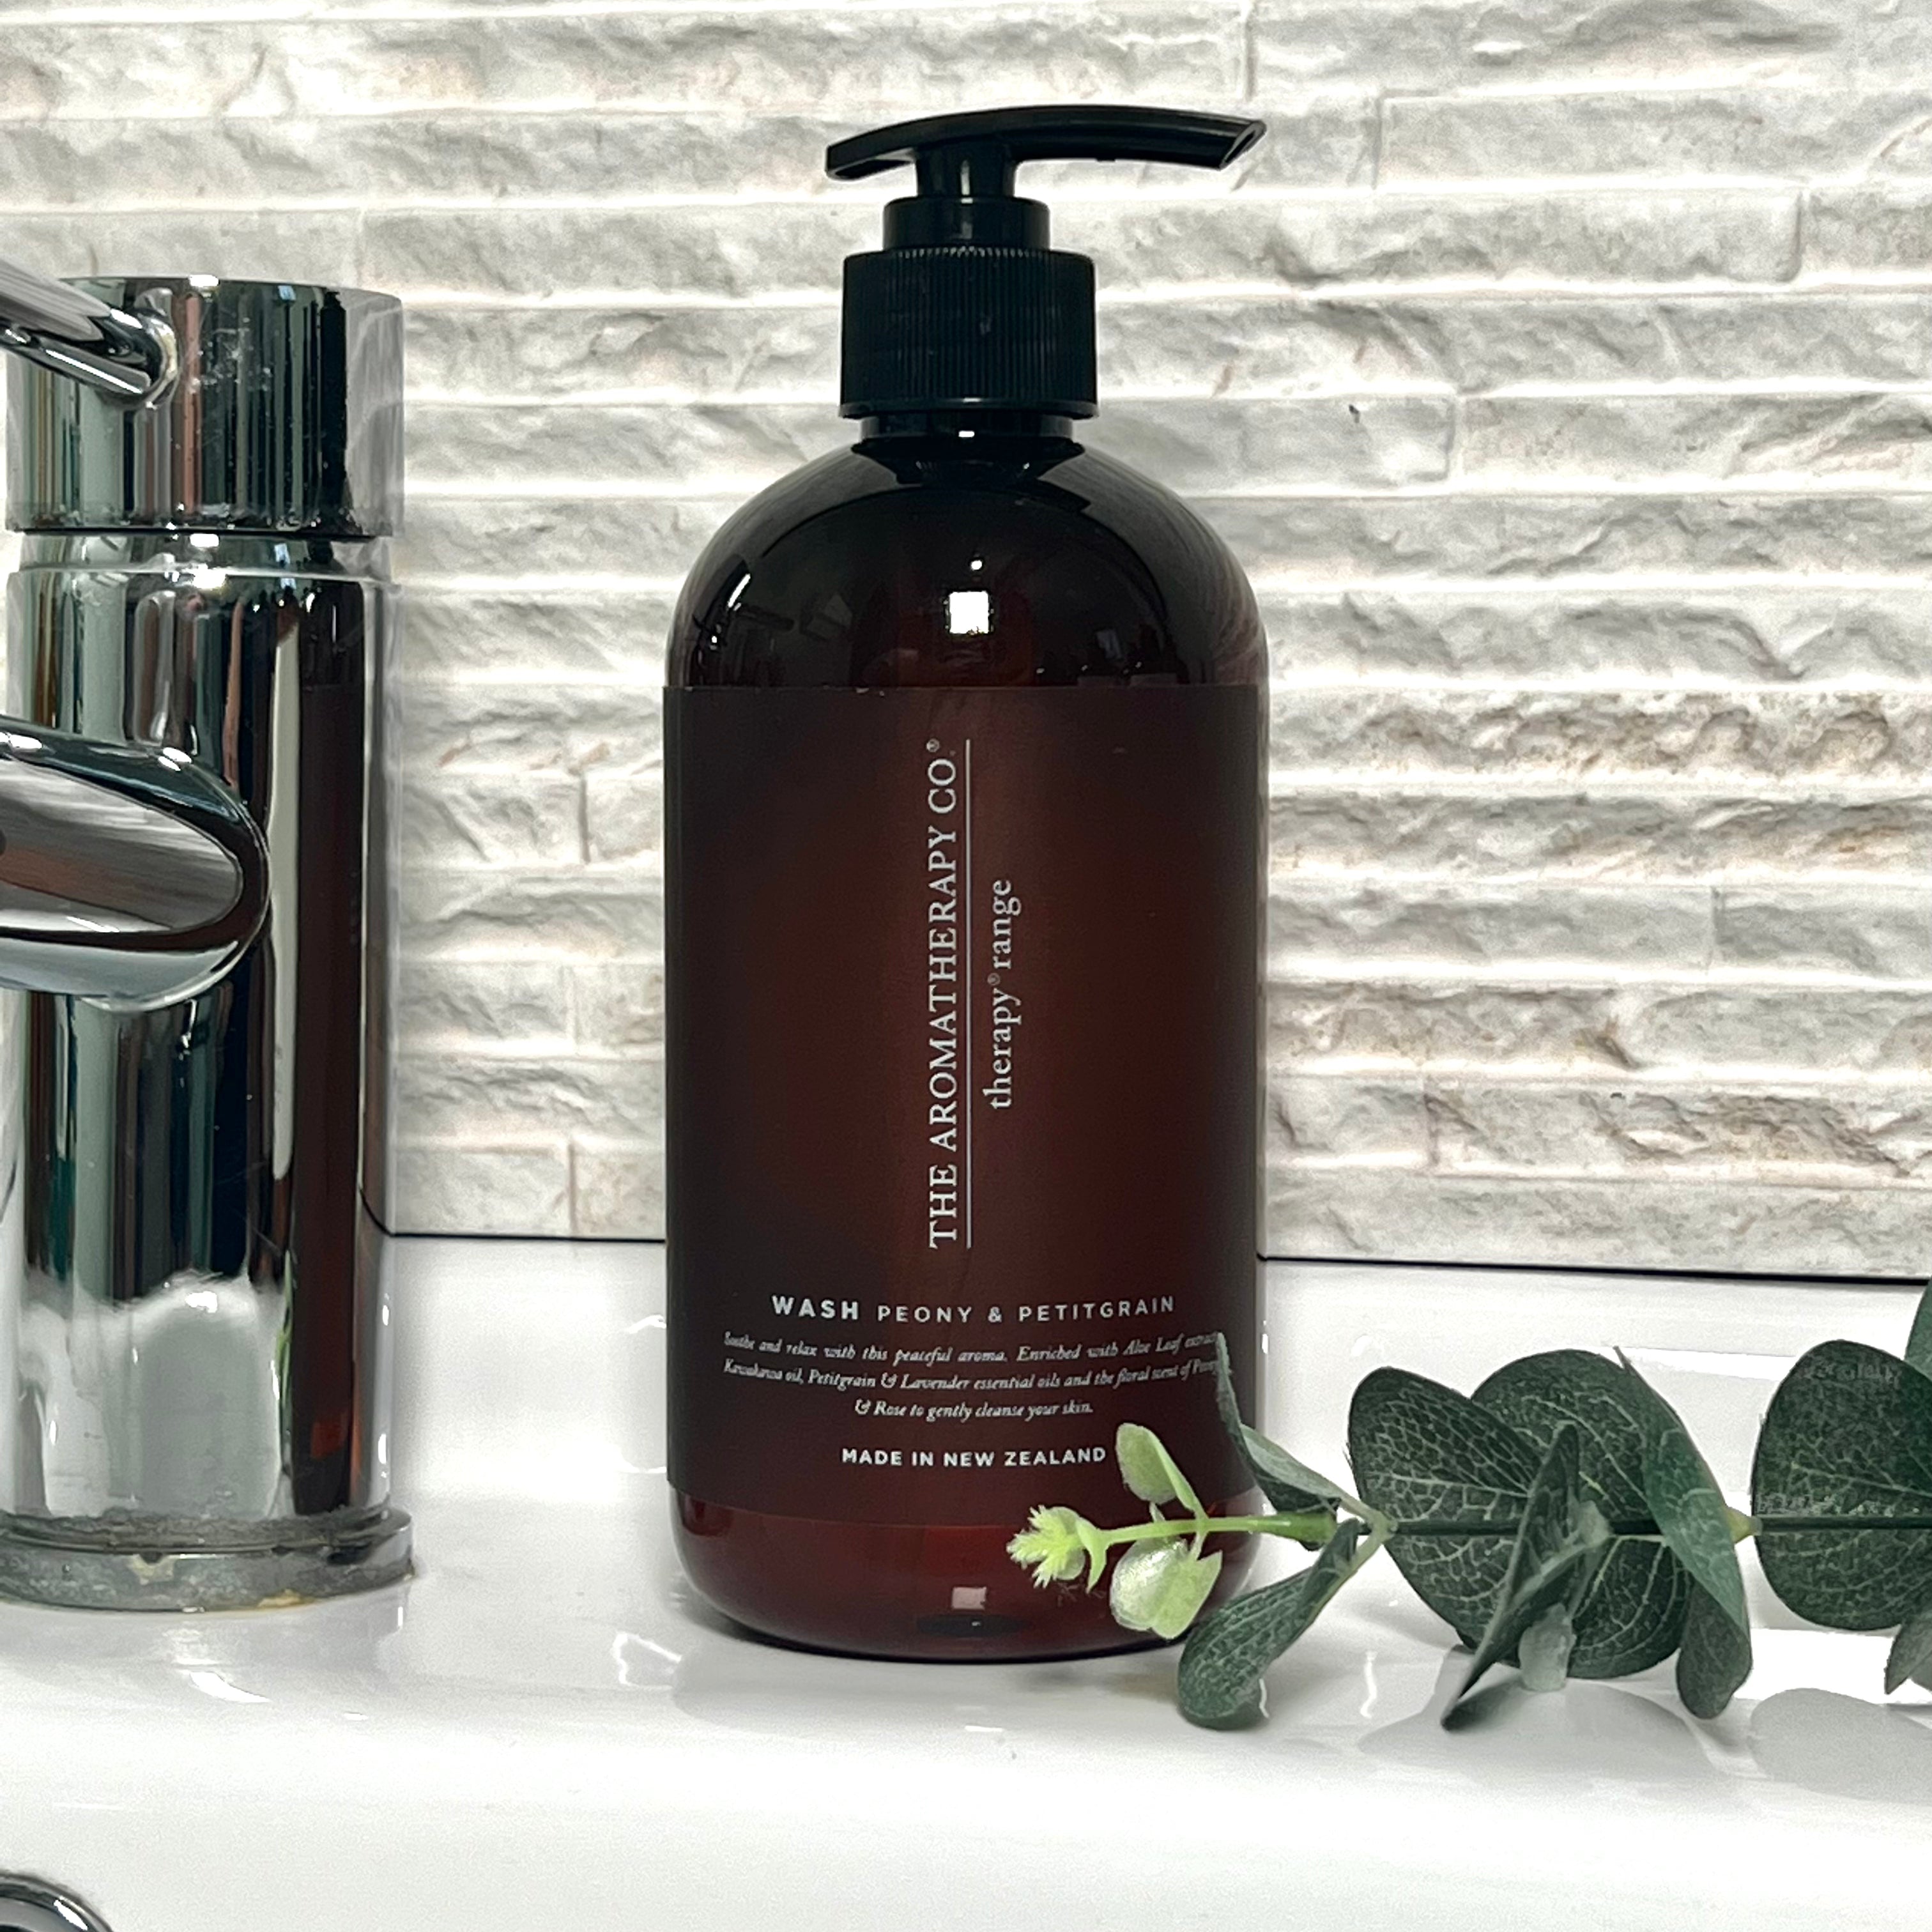 The Aromatherapy Co Therapy Range Soothe Petitgrain & Peony Wash